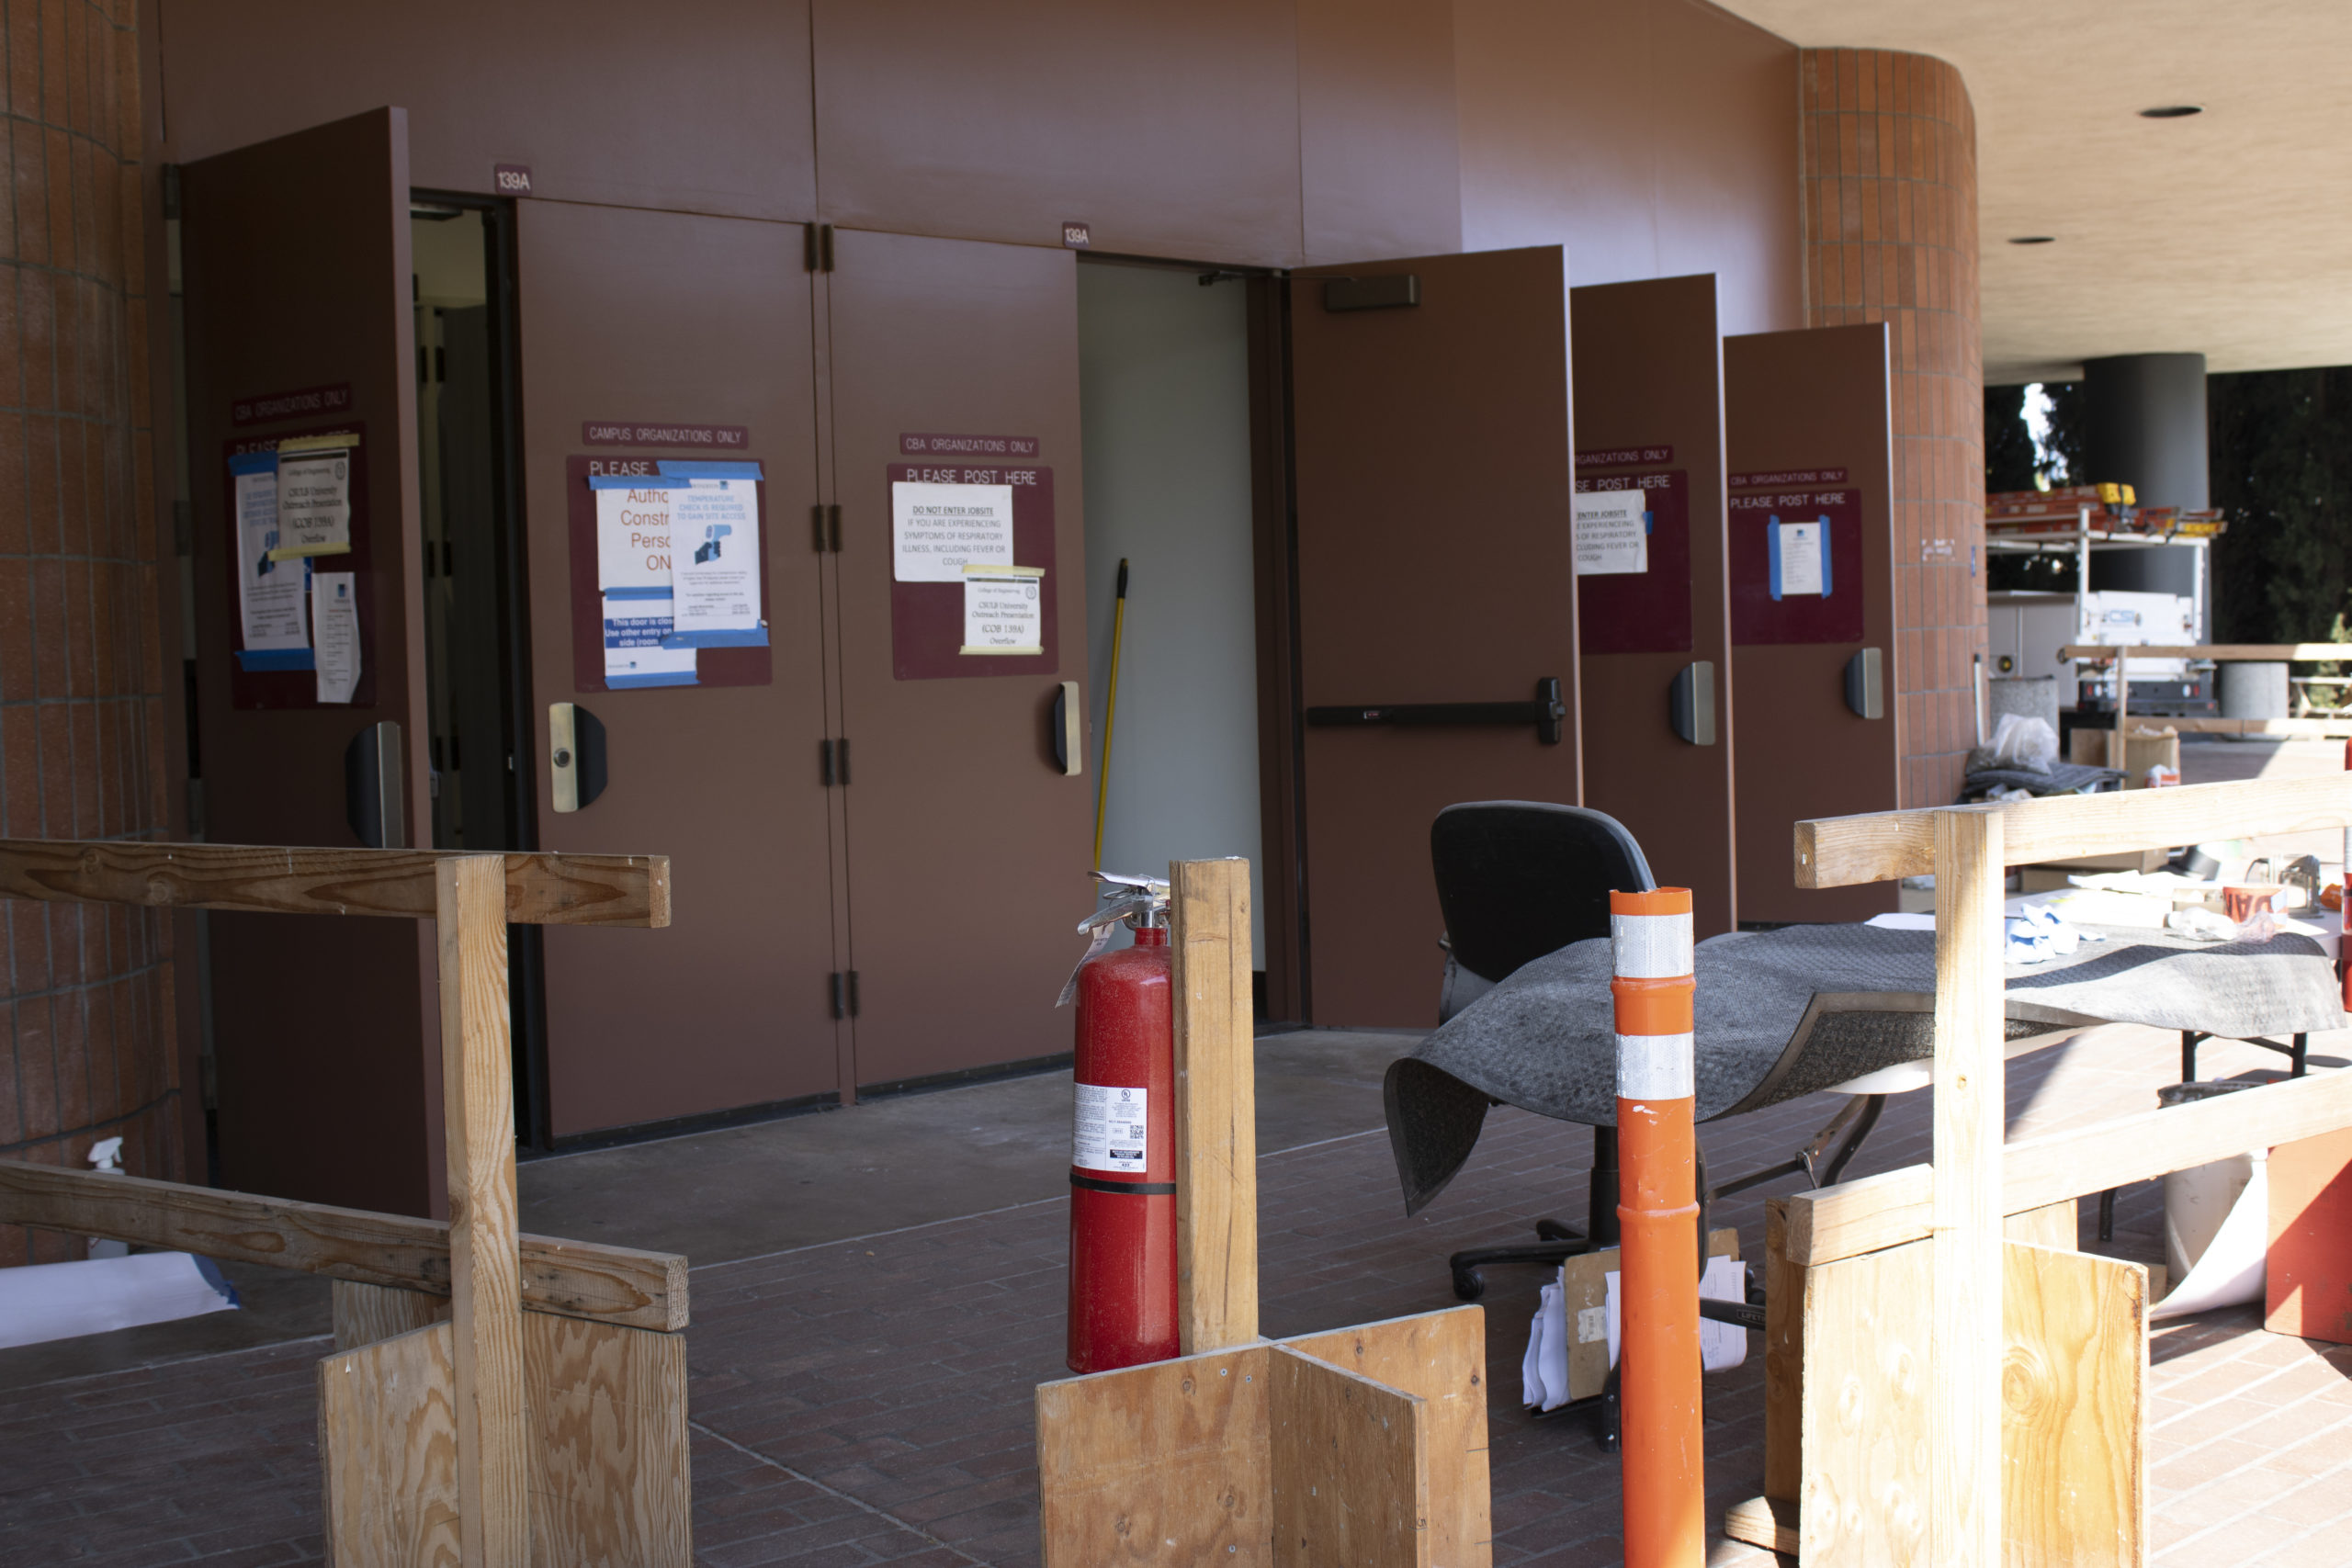 Construction is being conducted on a classroom in the College of Business. Chairs and construction materials are outside the room